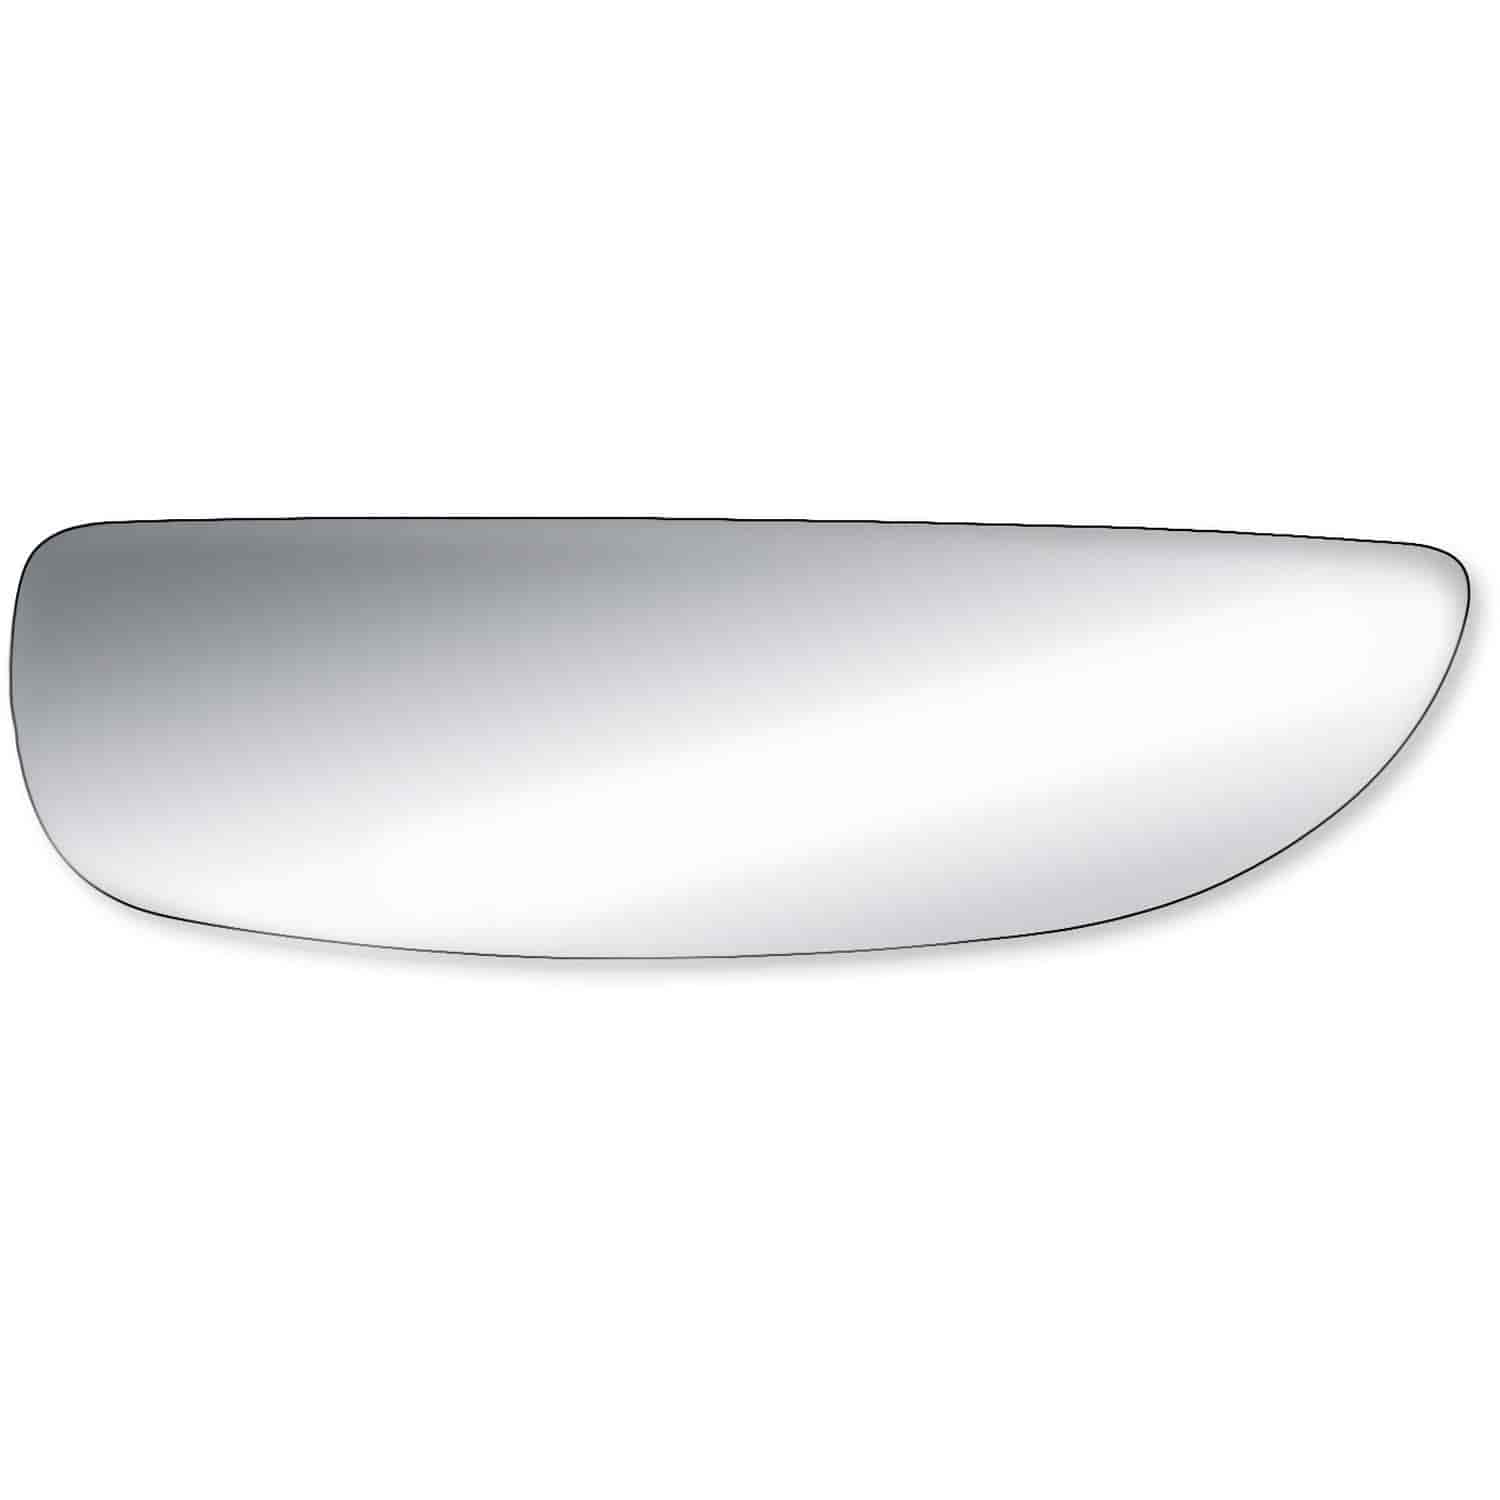 Replacement Glass for 02-14 Econoline towing mirror bottom